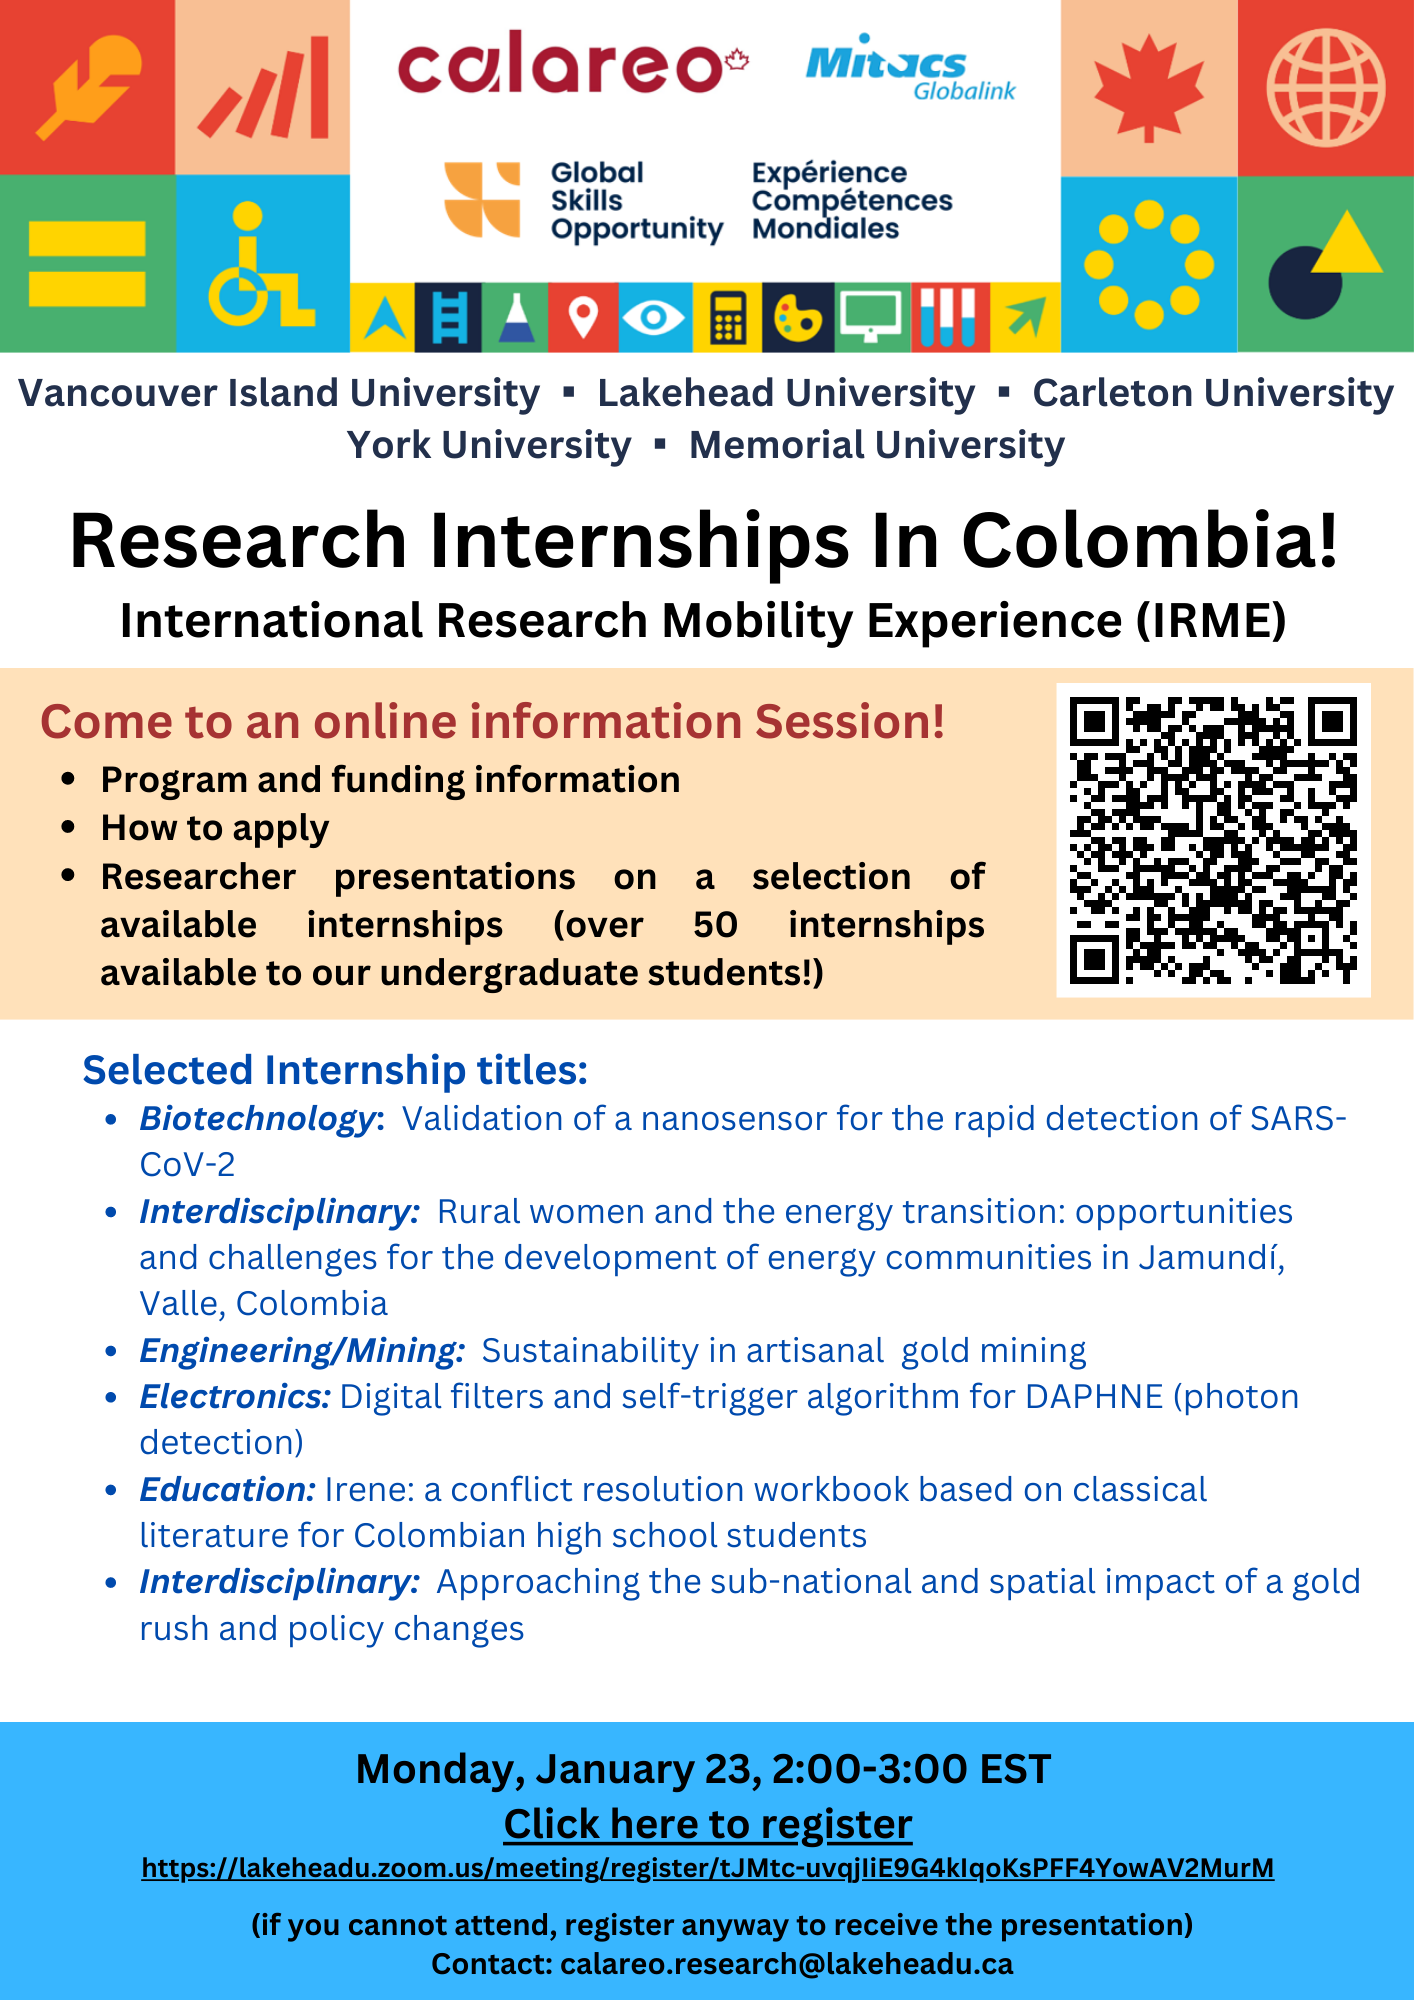 Poster for International Research Mobility Experience - Student Information Session